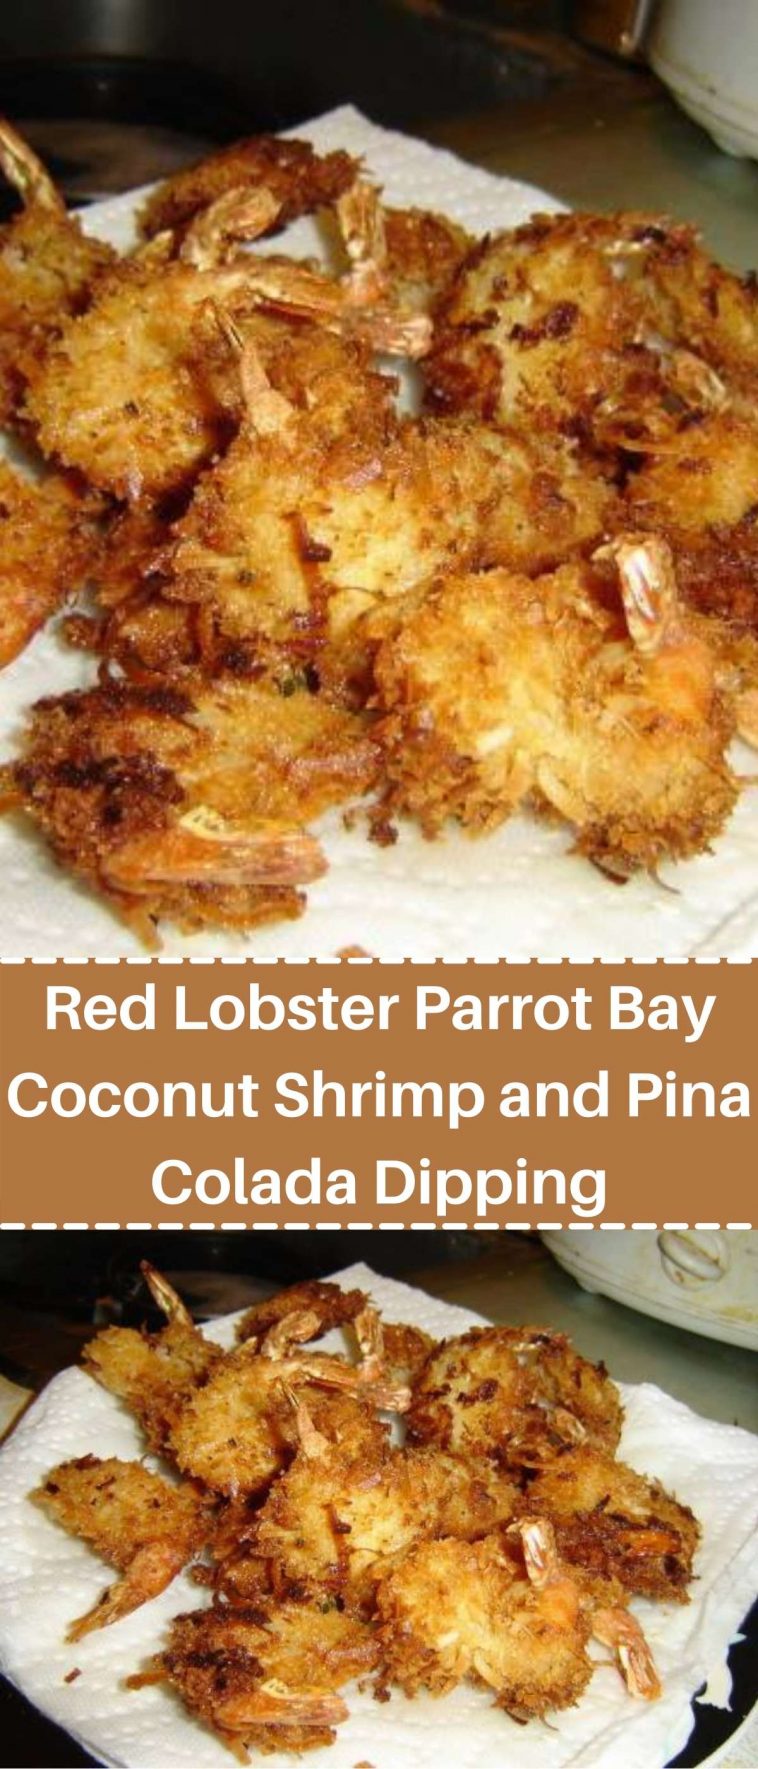 Red Lobster Parrot Bay Coconut Shrimp and Pina Colada Dipping Sauce